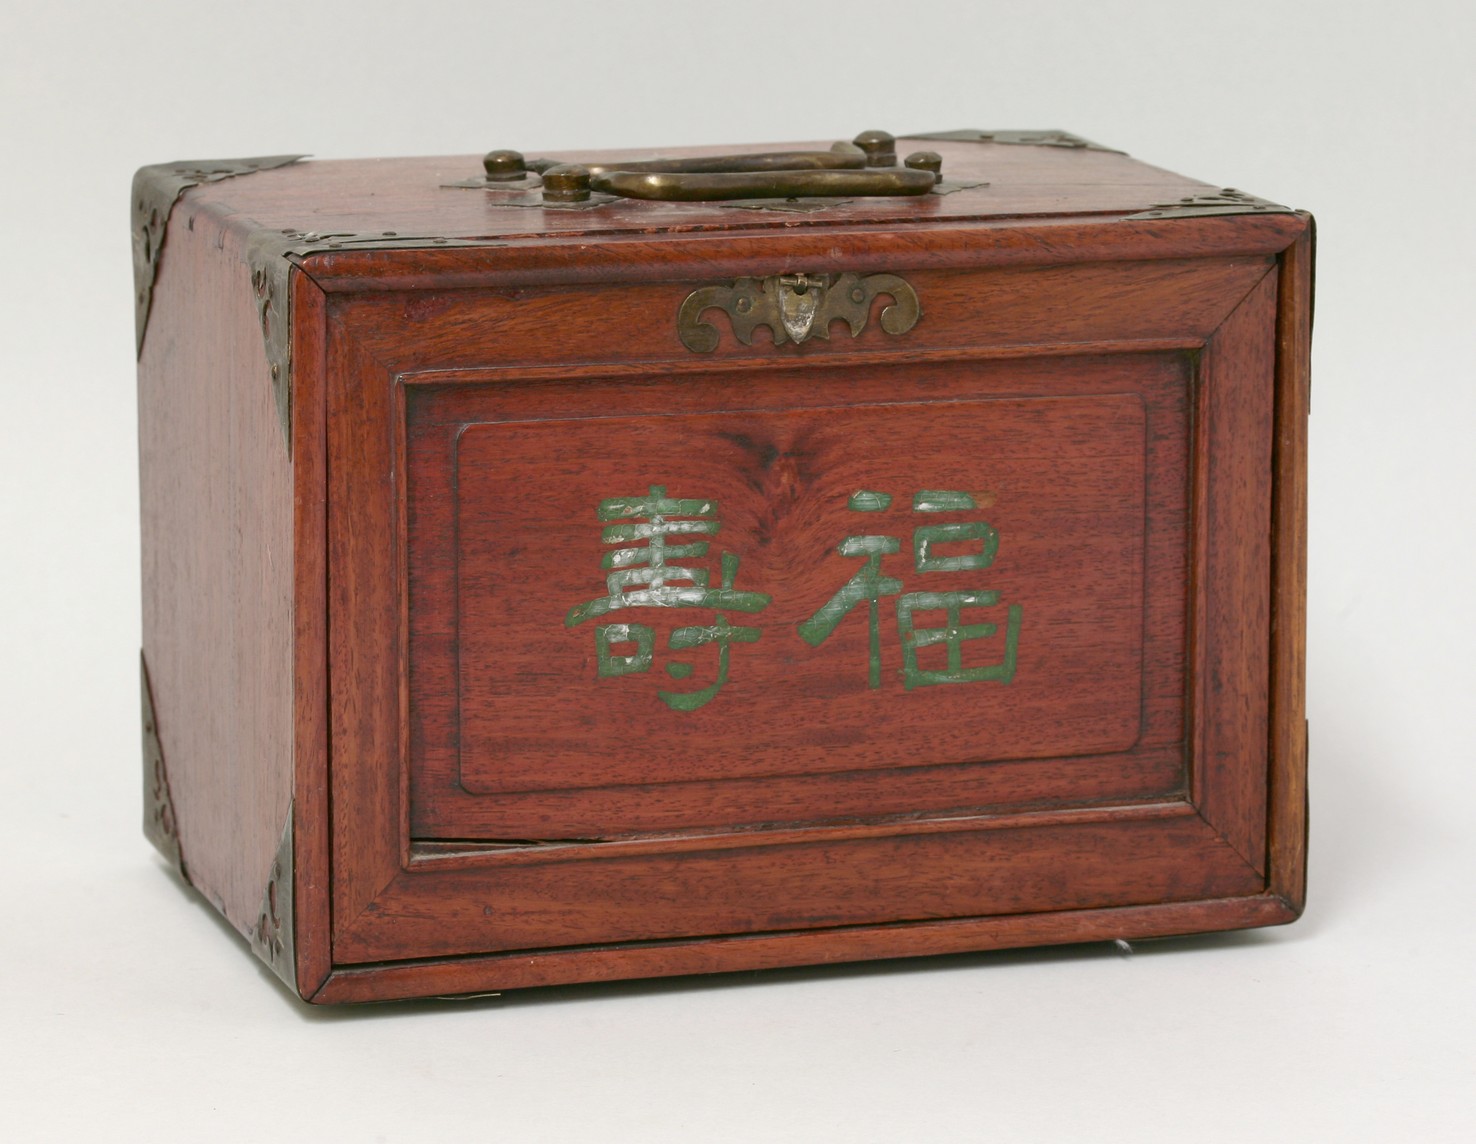 A bone Mah Jong Set,
probably c.1892, the tiles appropriately engraved and coloured, and contained